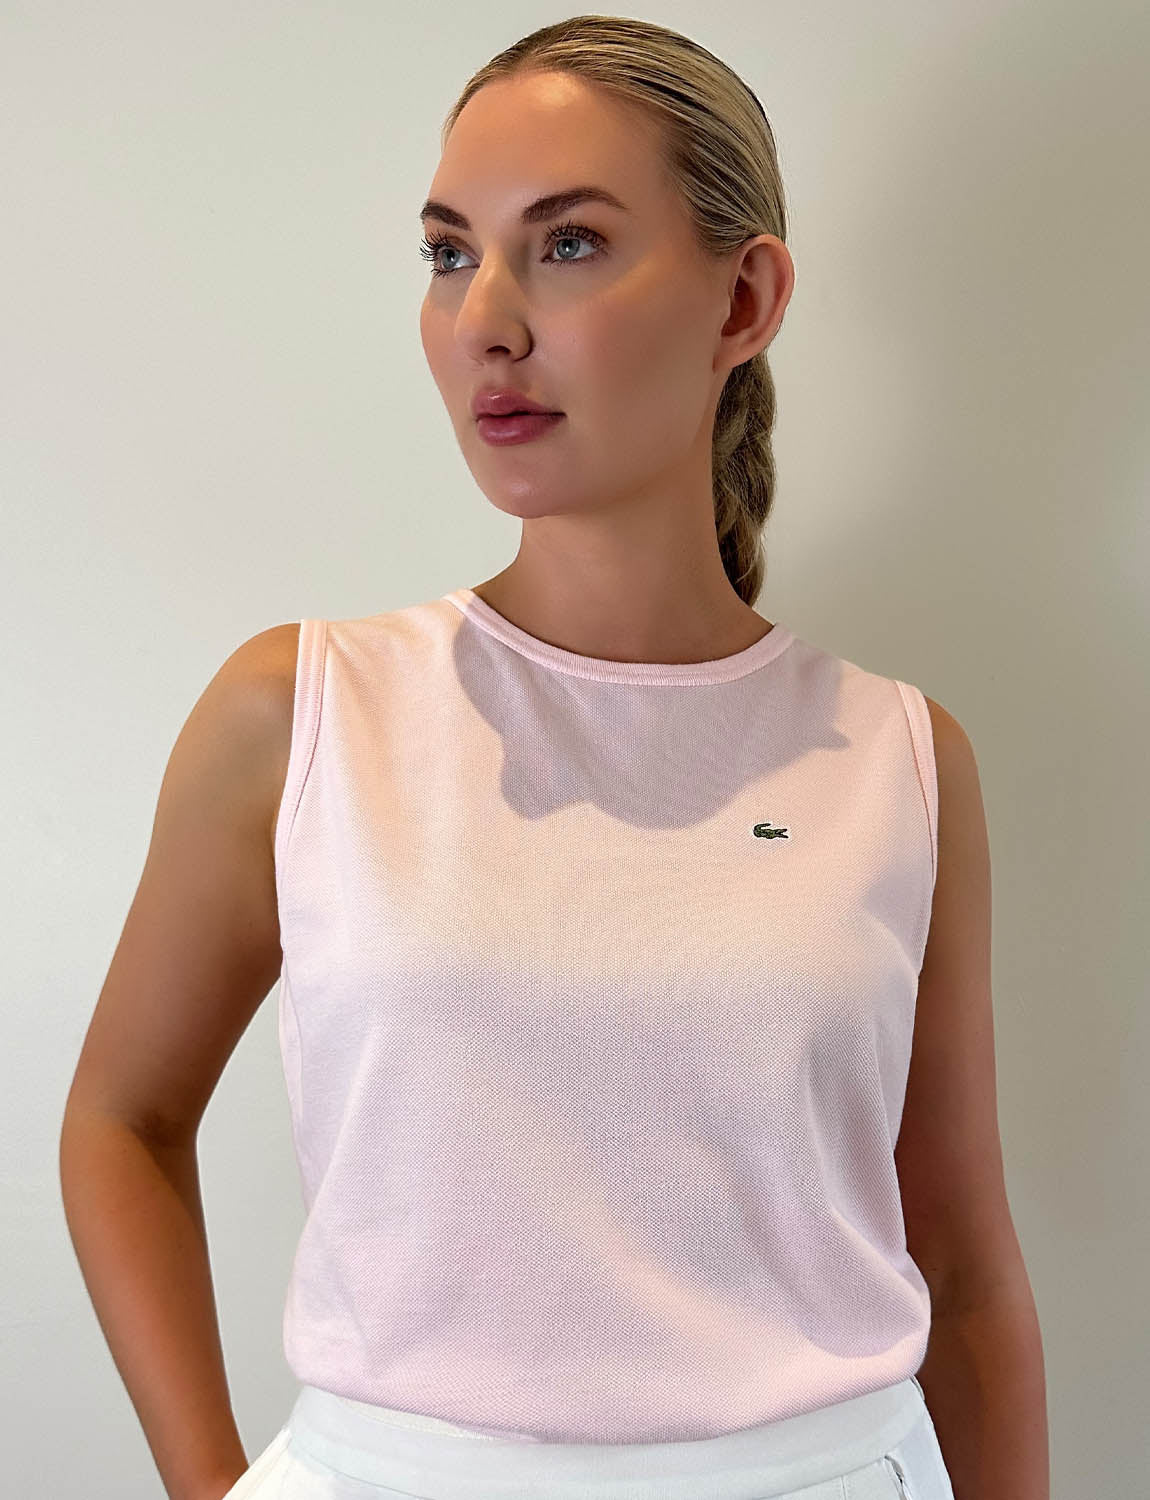 Lacoste Top – HEDGE